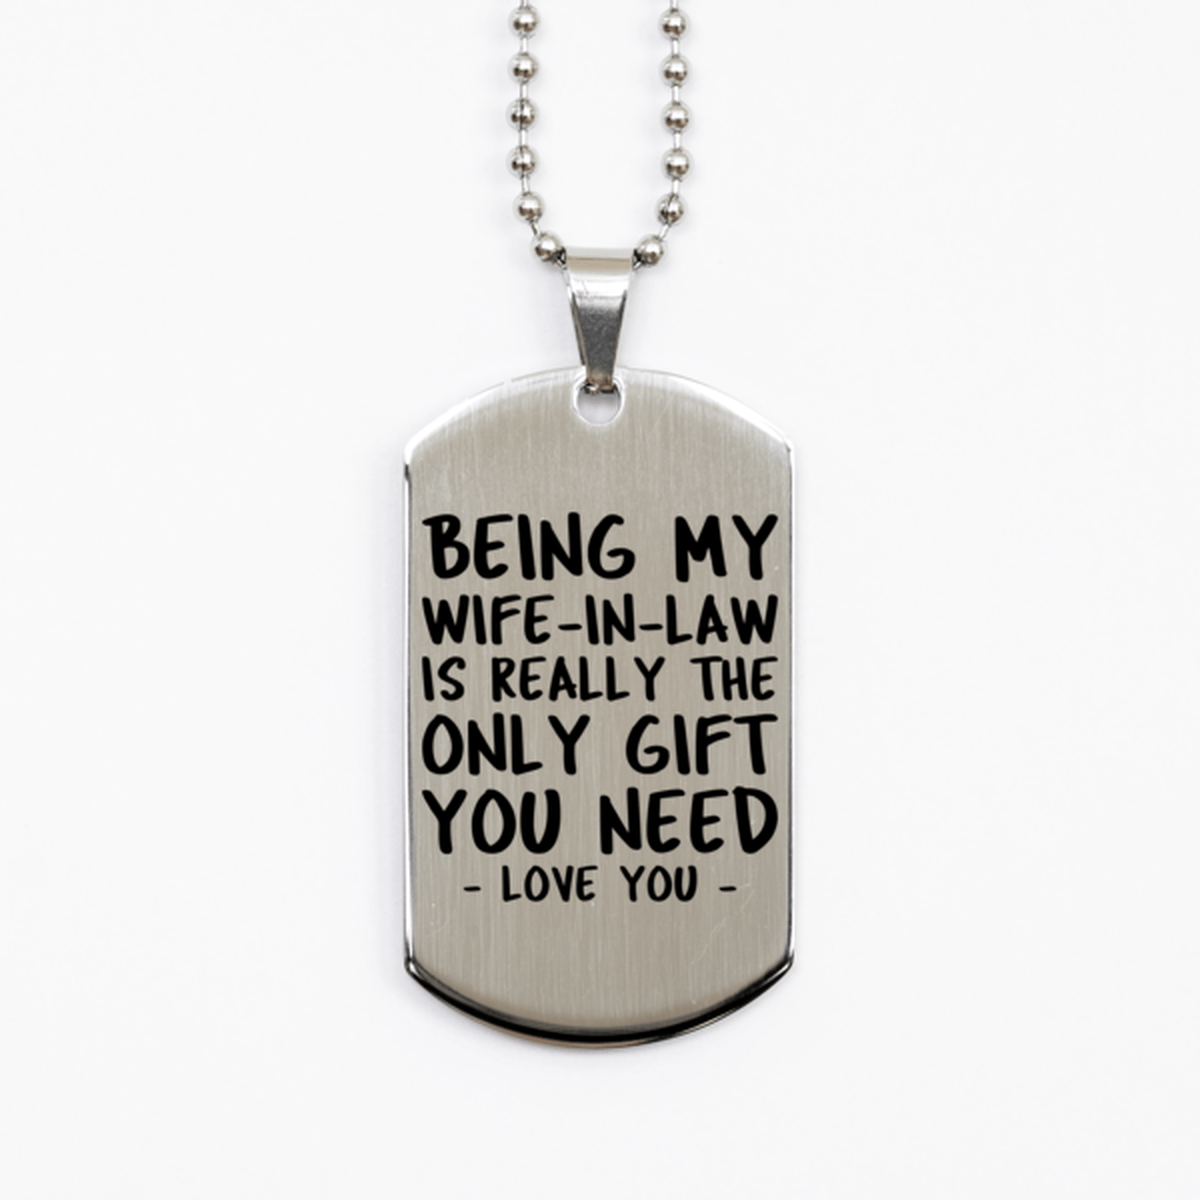 Funny Wife-in-law Silver Dog Tag Necklace, Being My Wife-in-law Is Really the Only Gift You Need, Best Birthday Gifts for Wife-in-law